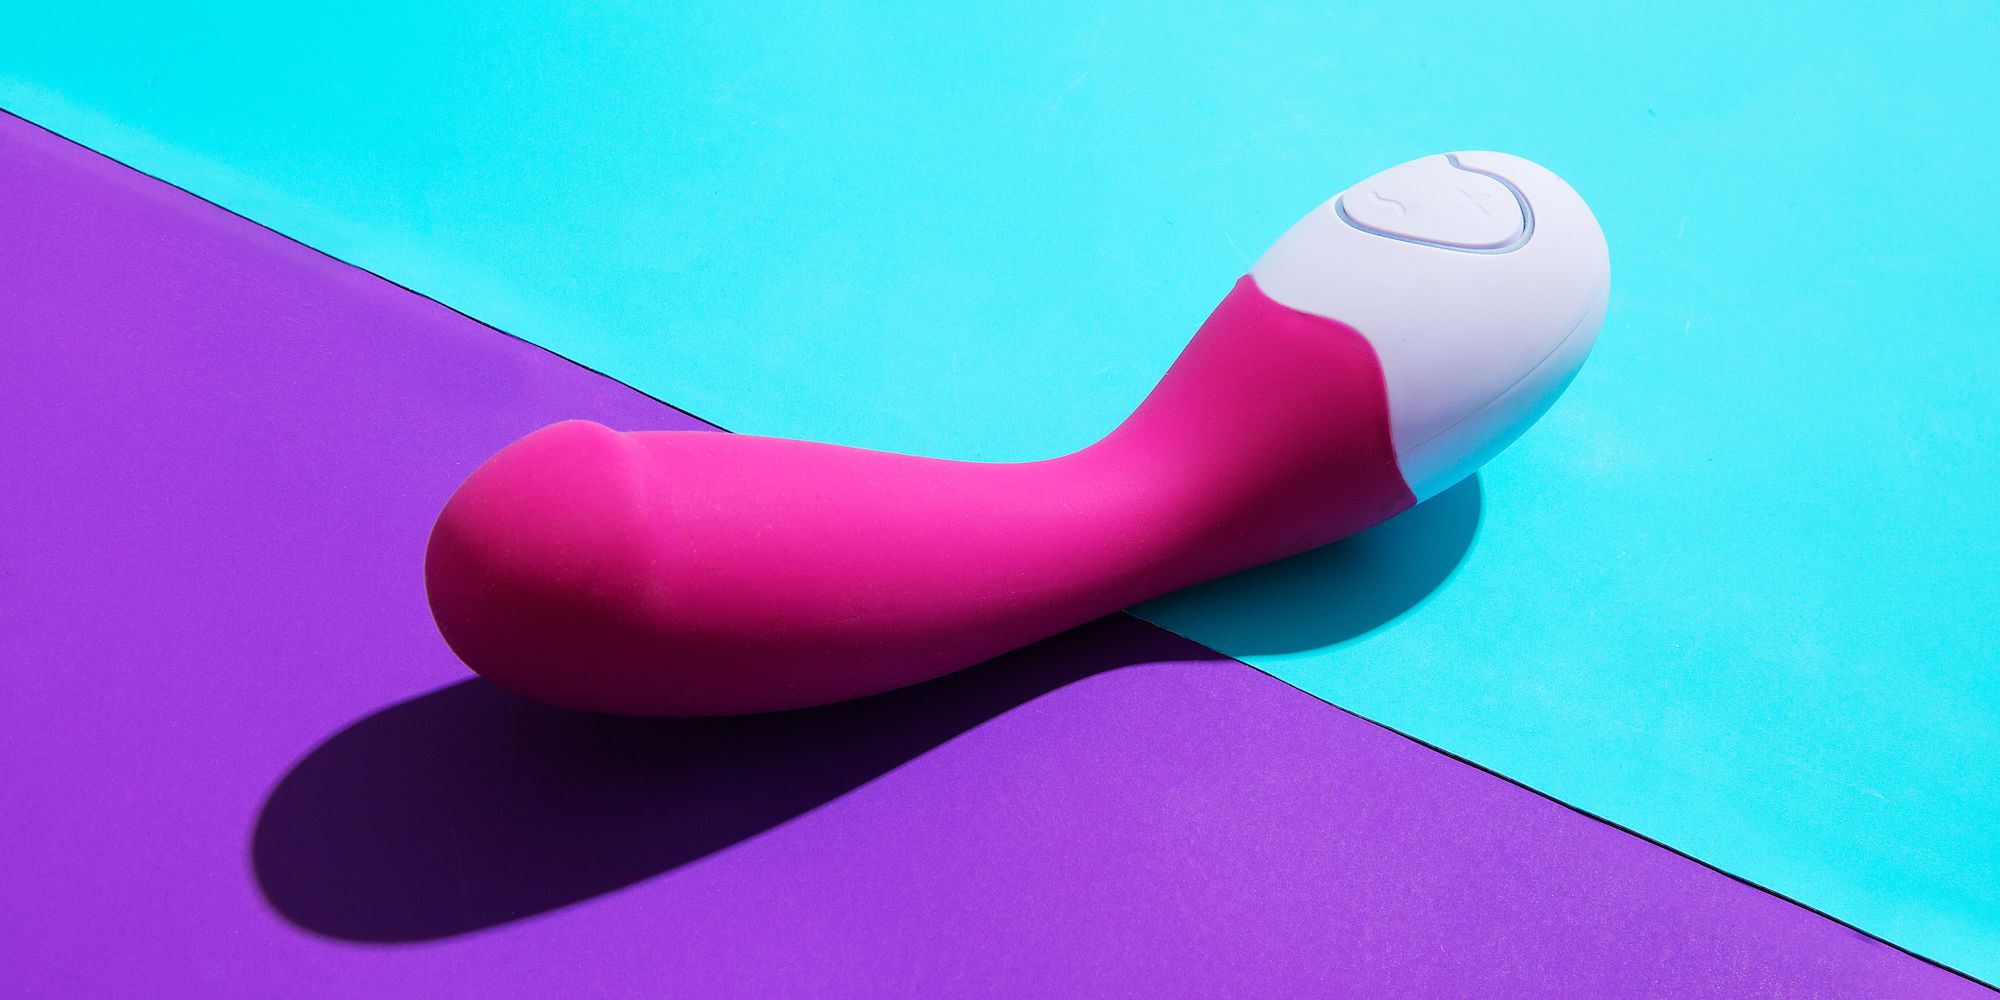 How Does Using a Vibrator Affect Your Body? pic image